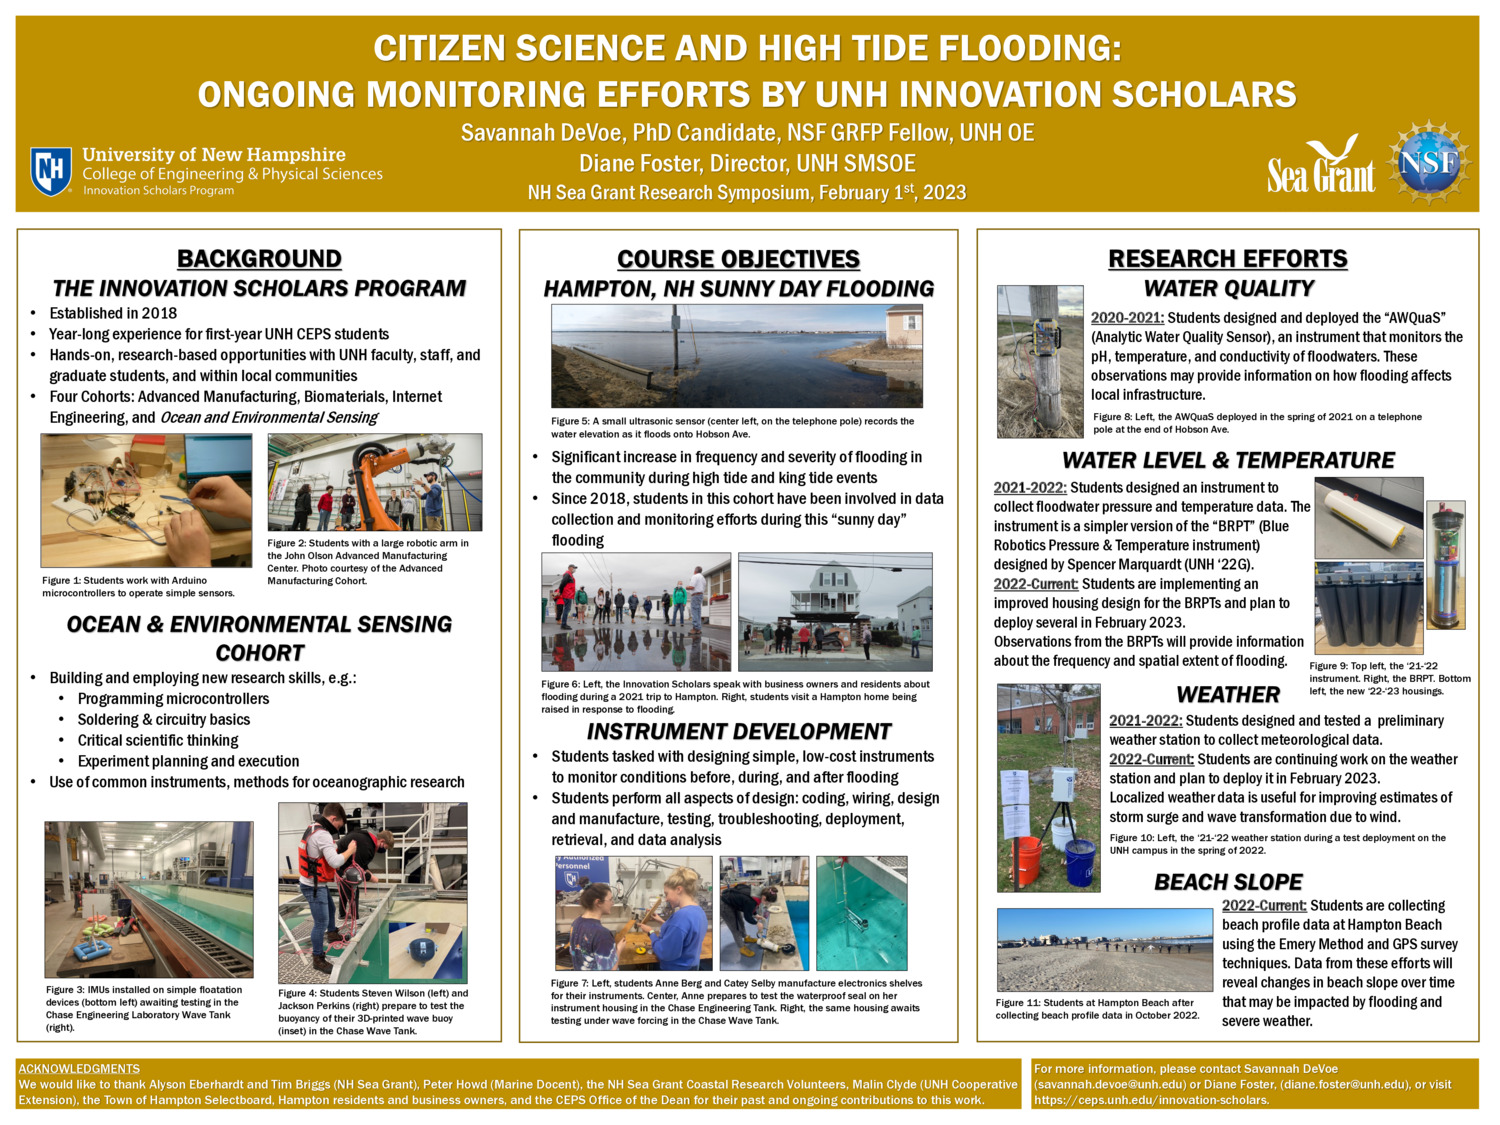 Citizen Science And High Tide Flooding: Ongoing Monitoring Efforts By Unh Innovation Scholars by srd1033